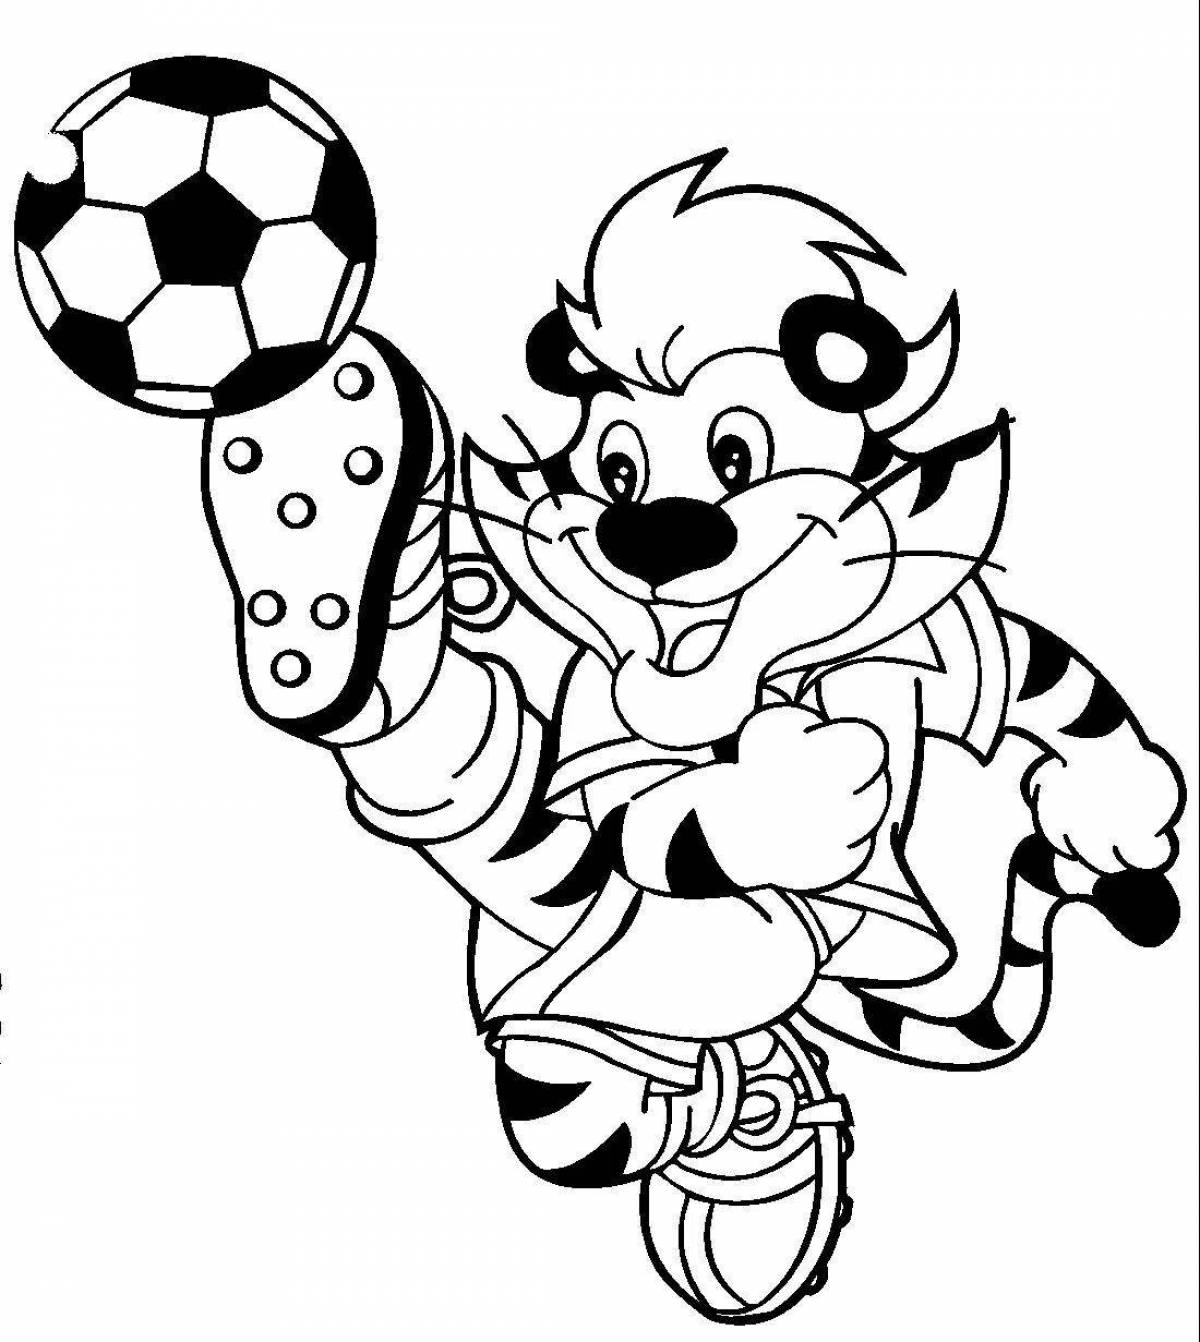 Lovely football world cup coloring page